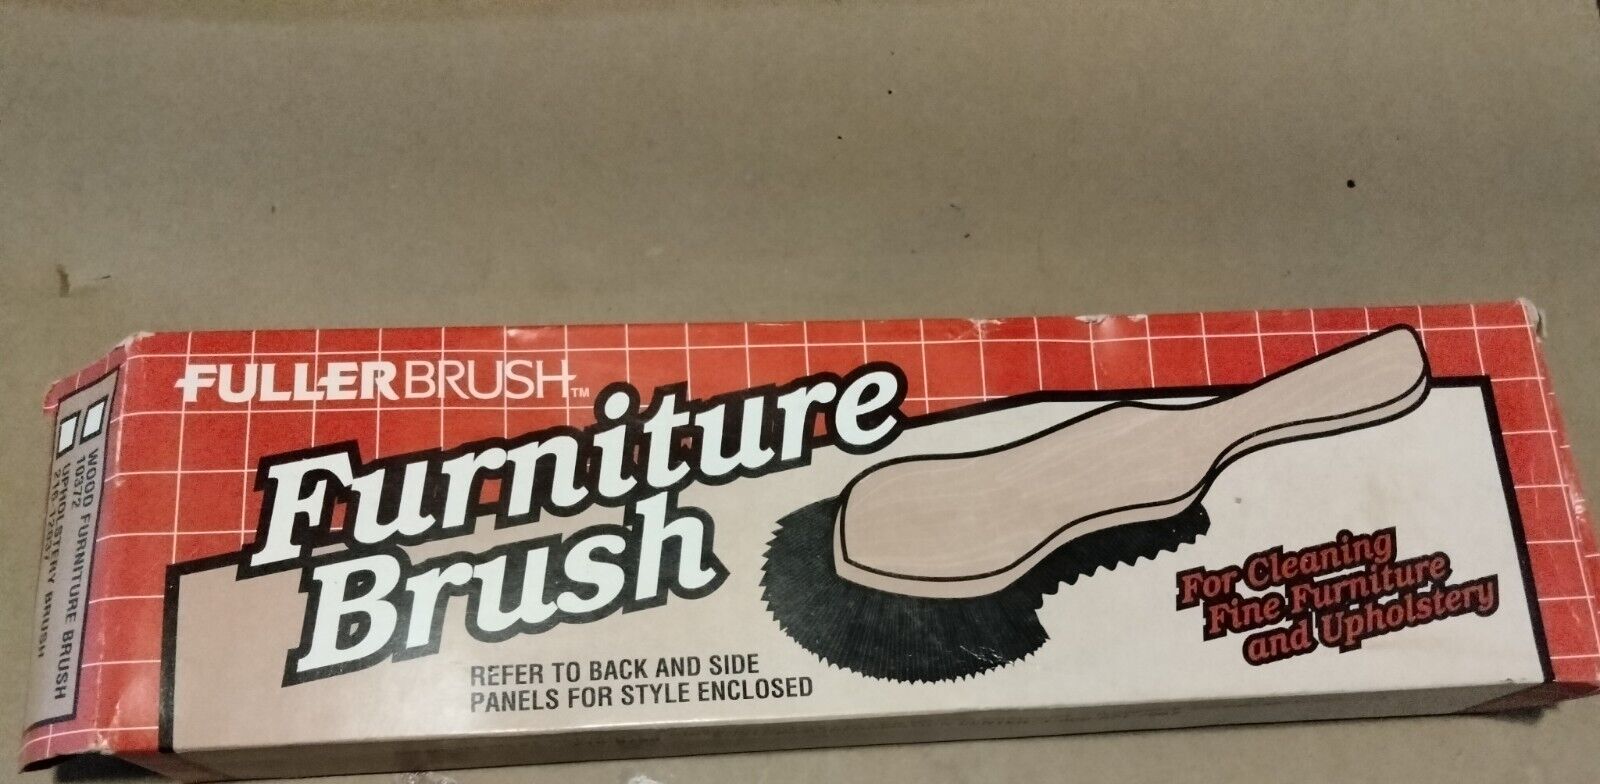 NEW Vintage Fuller Brush Company Furniture Upholstery Brush Made in West Germany